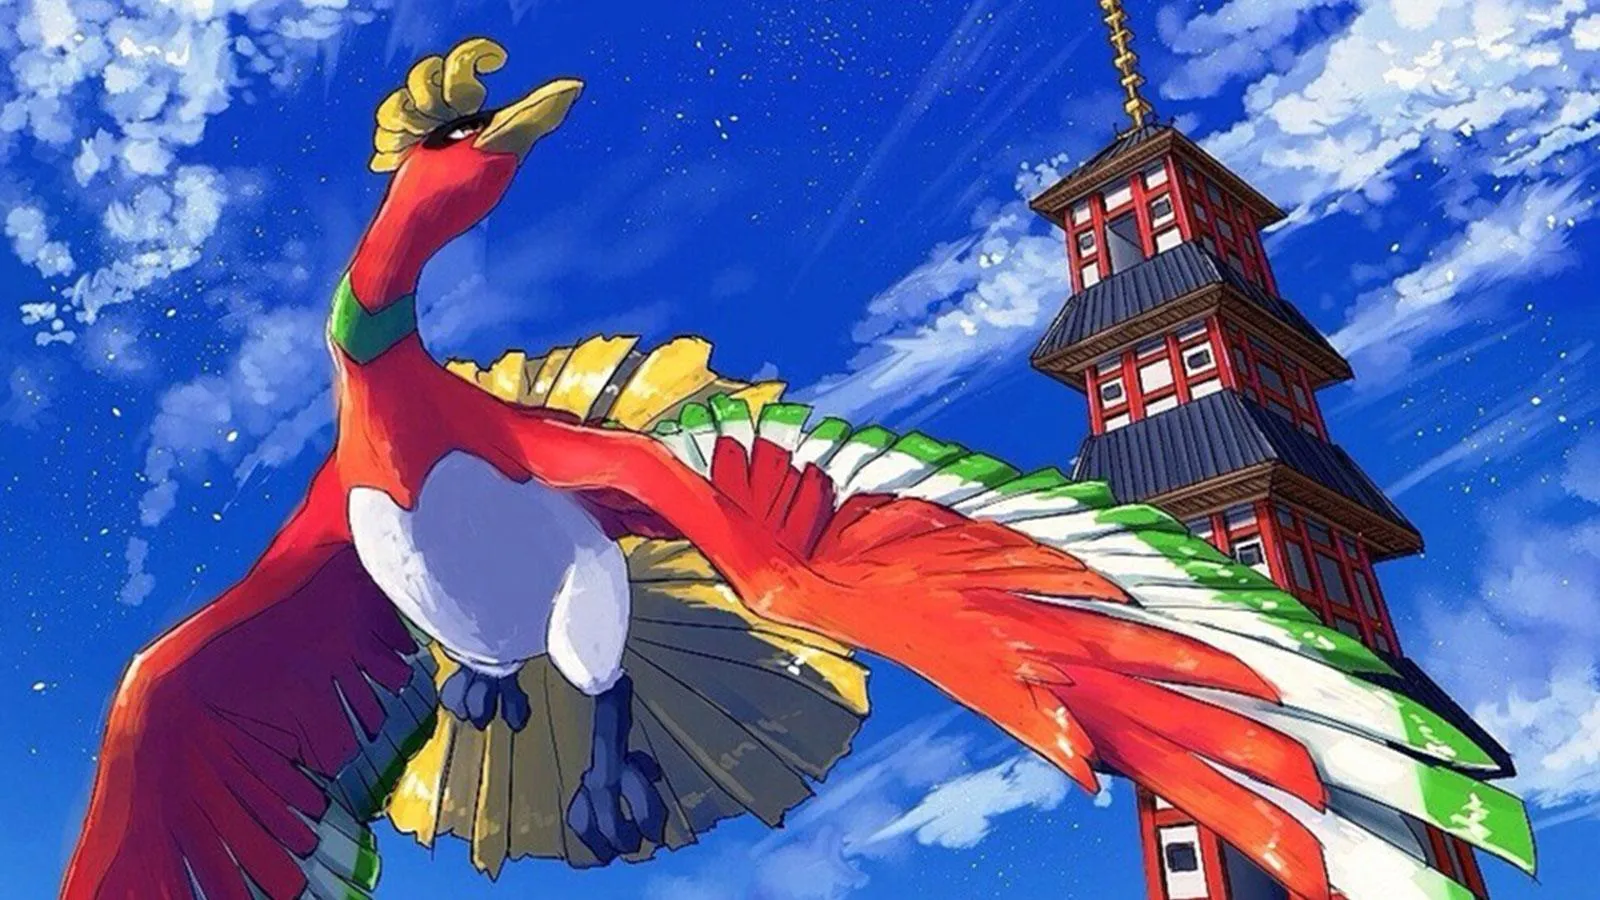 A return to Johto for the Pokémon franchise in 2024?